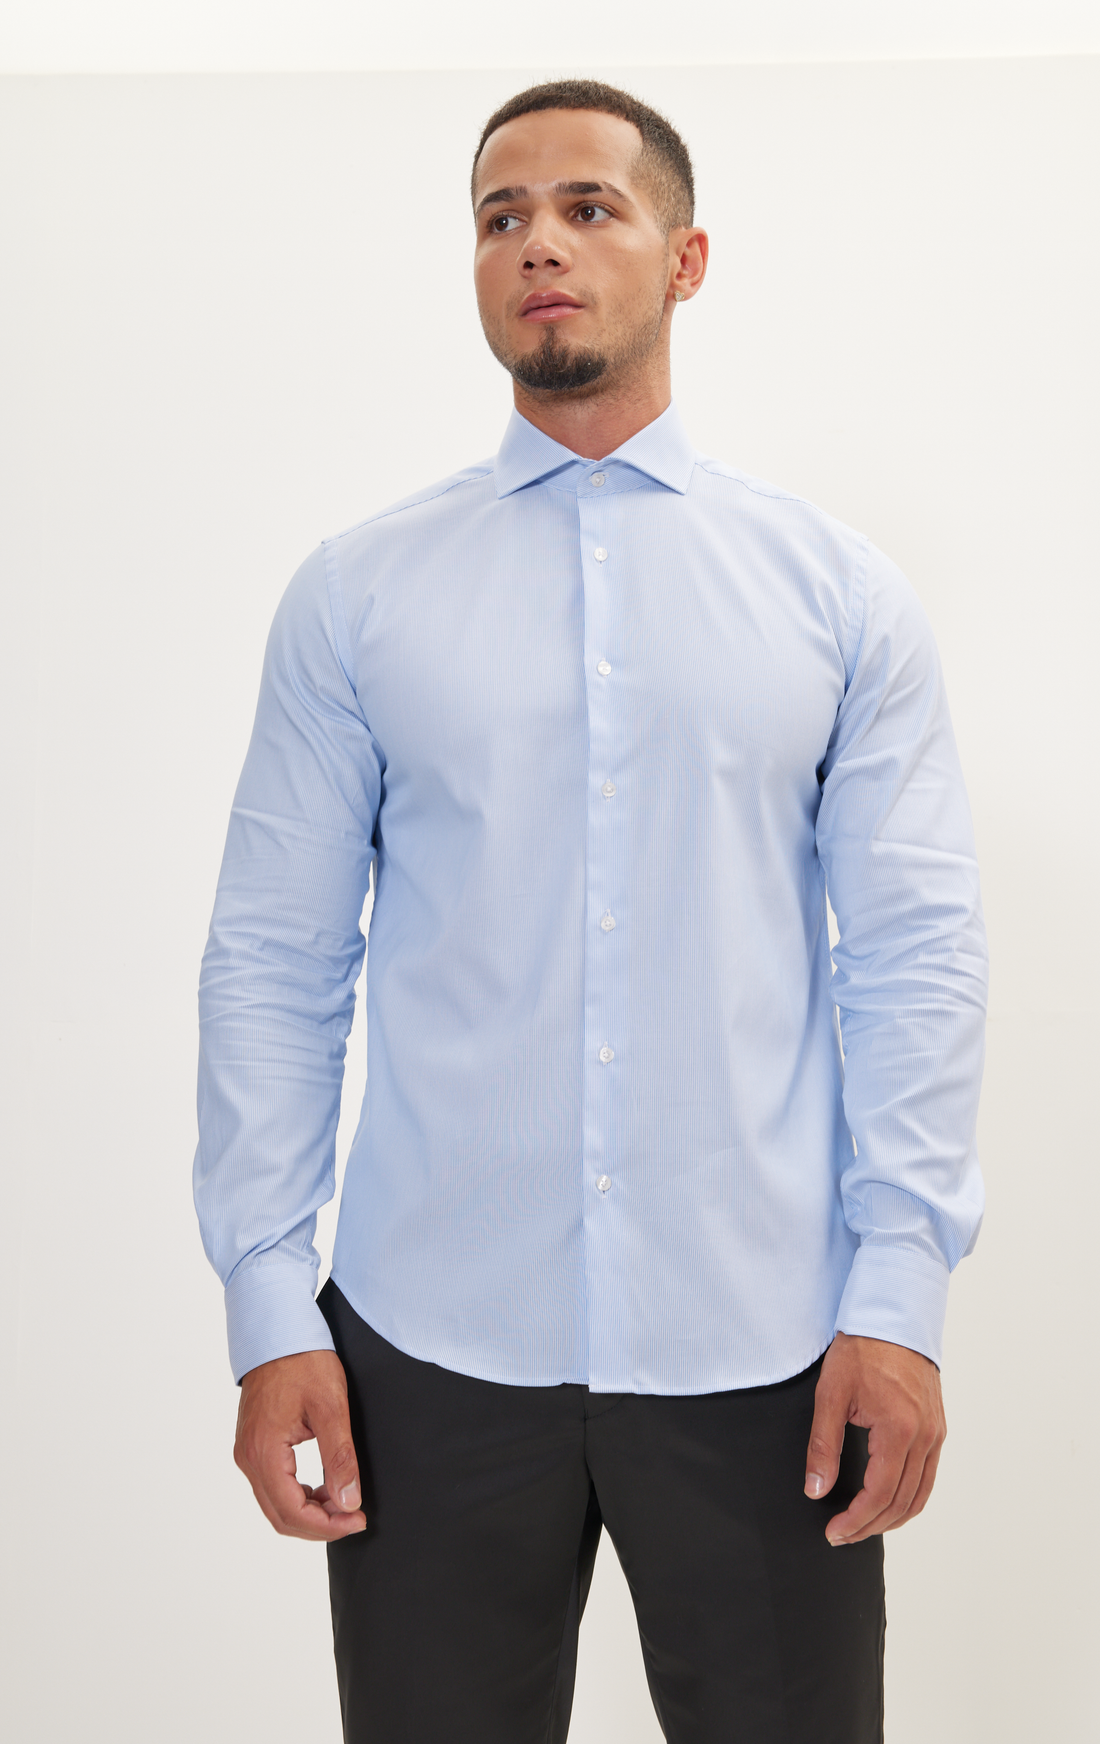 Pure Cotton French Placket Spread Collar Dress Shirt - Blue Striped